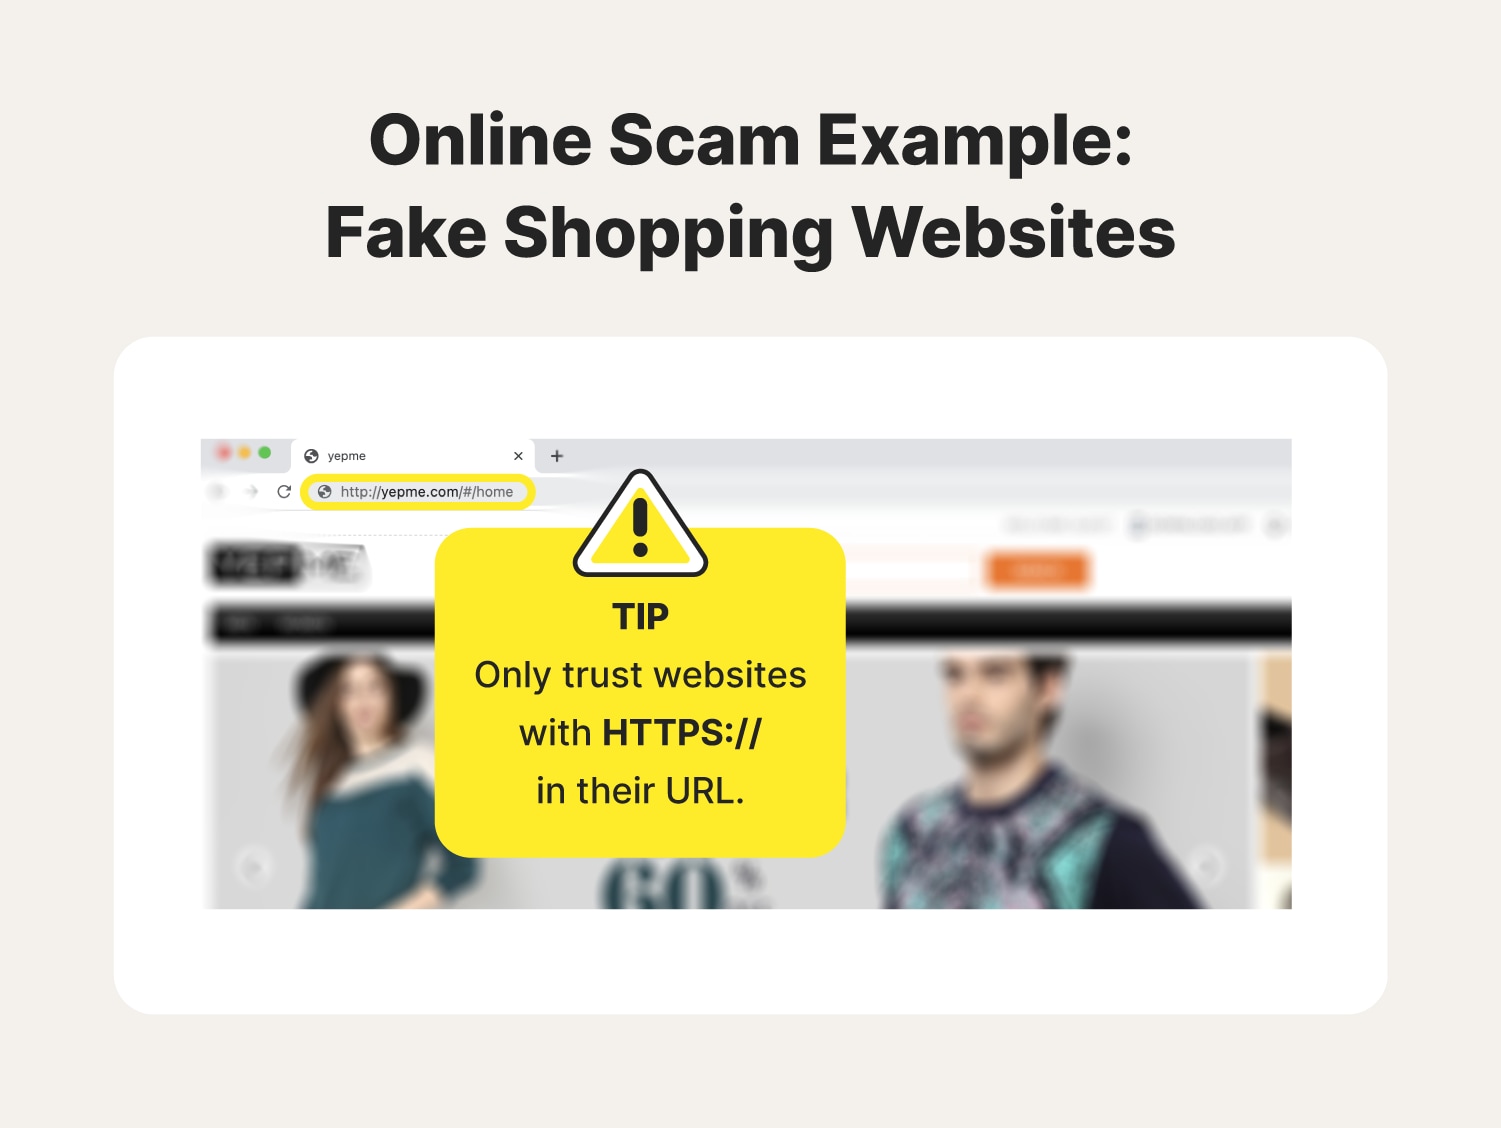 Online scam example fake shopping website